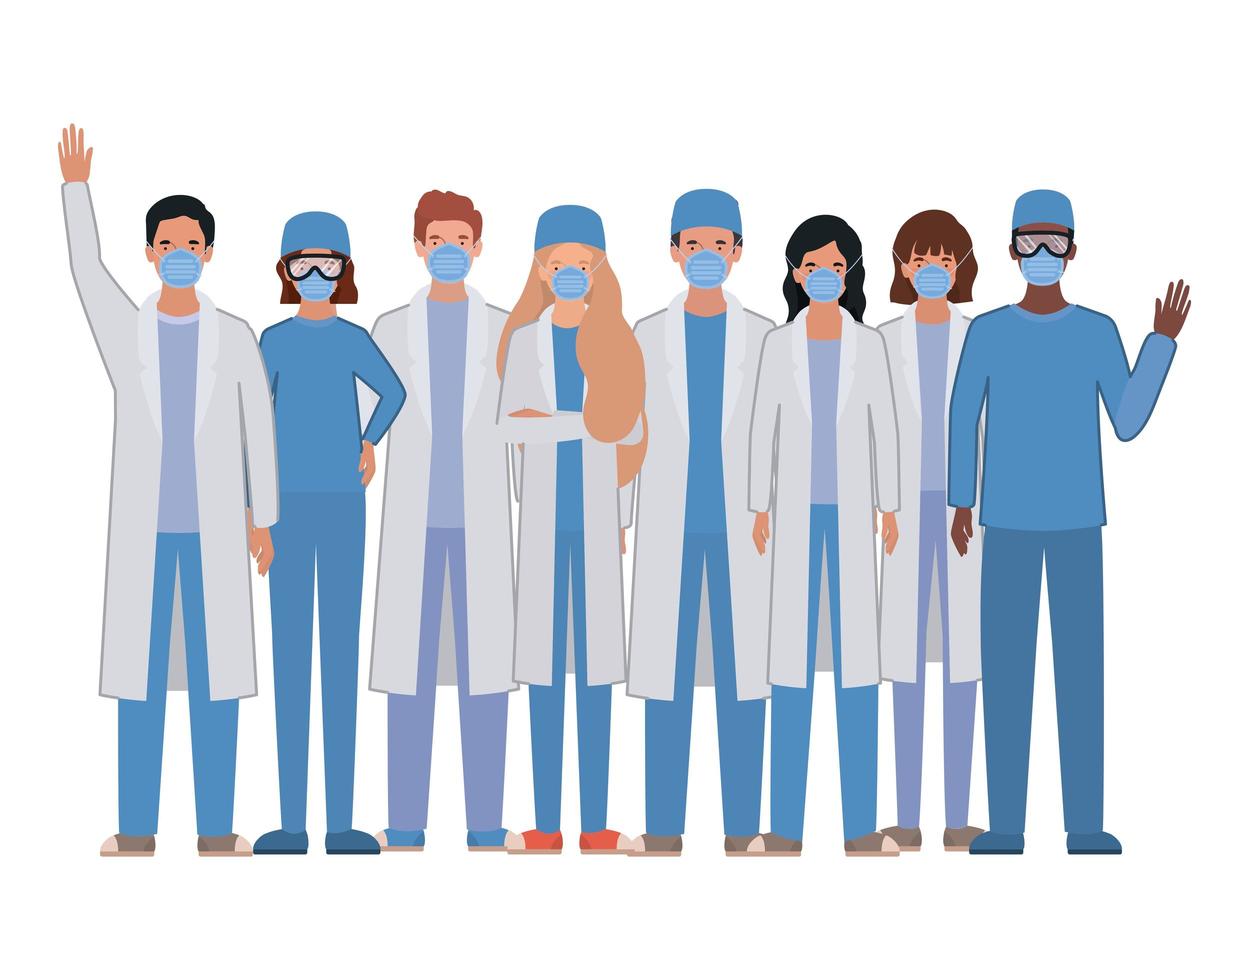 Men and women doctors with uniforms and masks vector